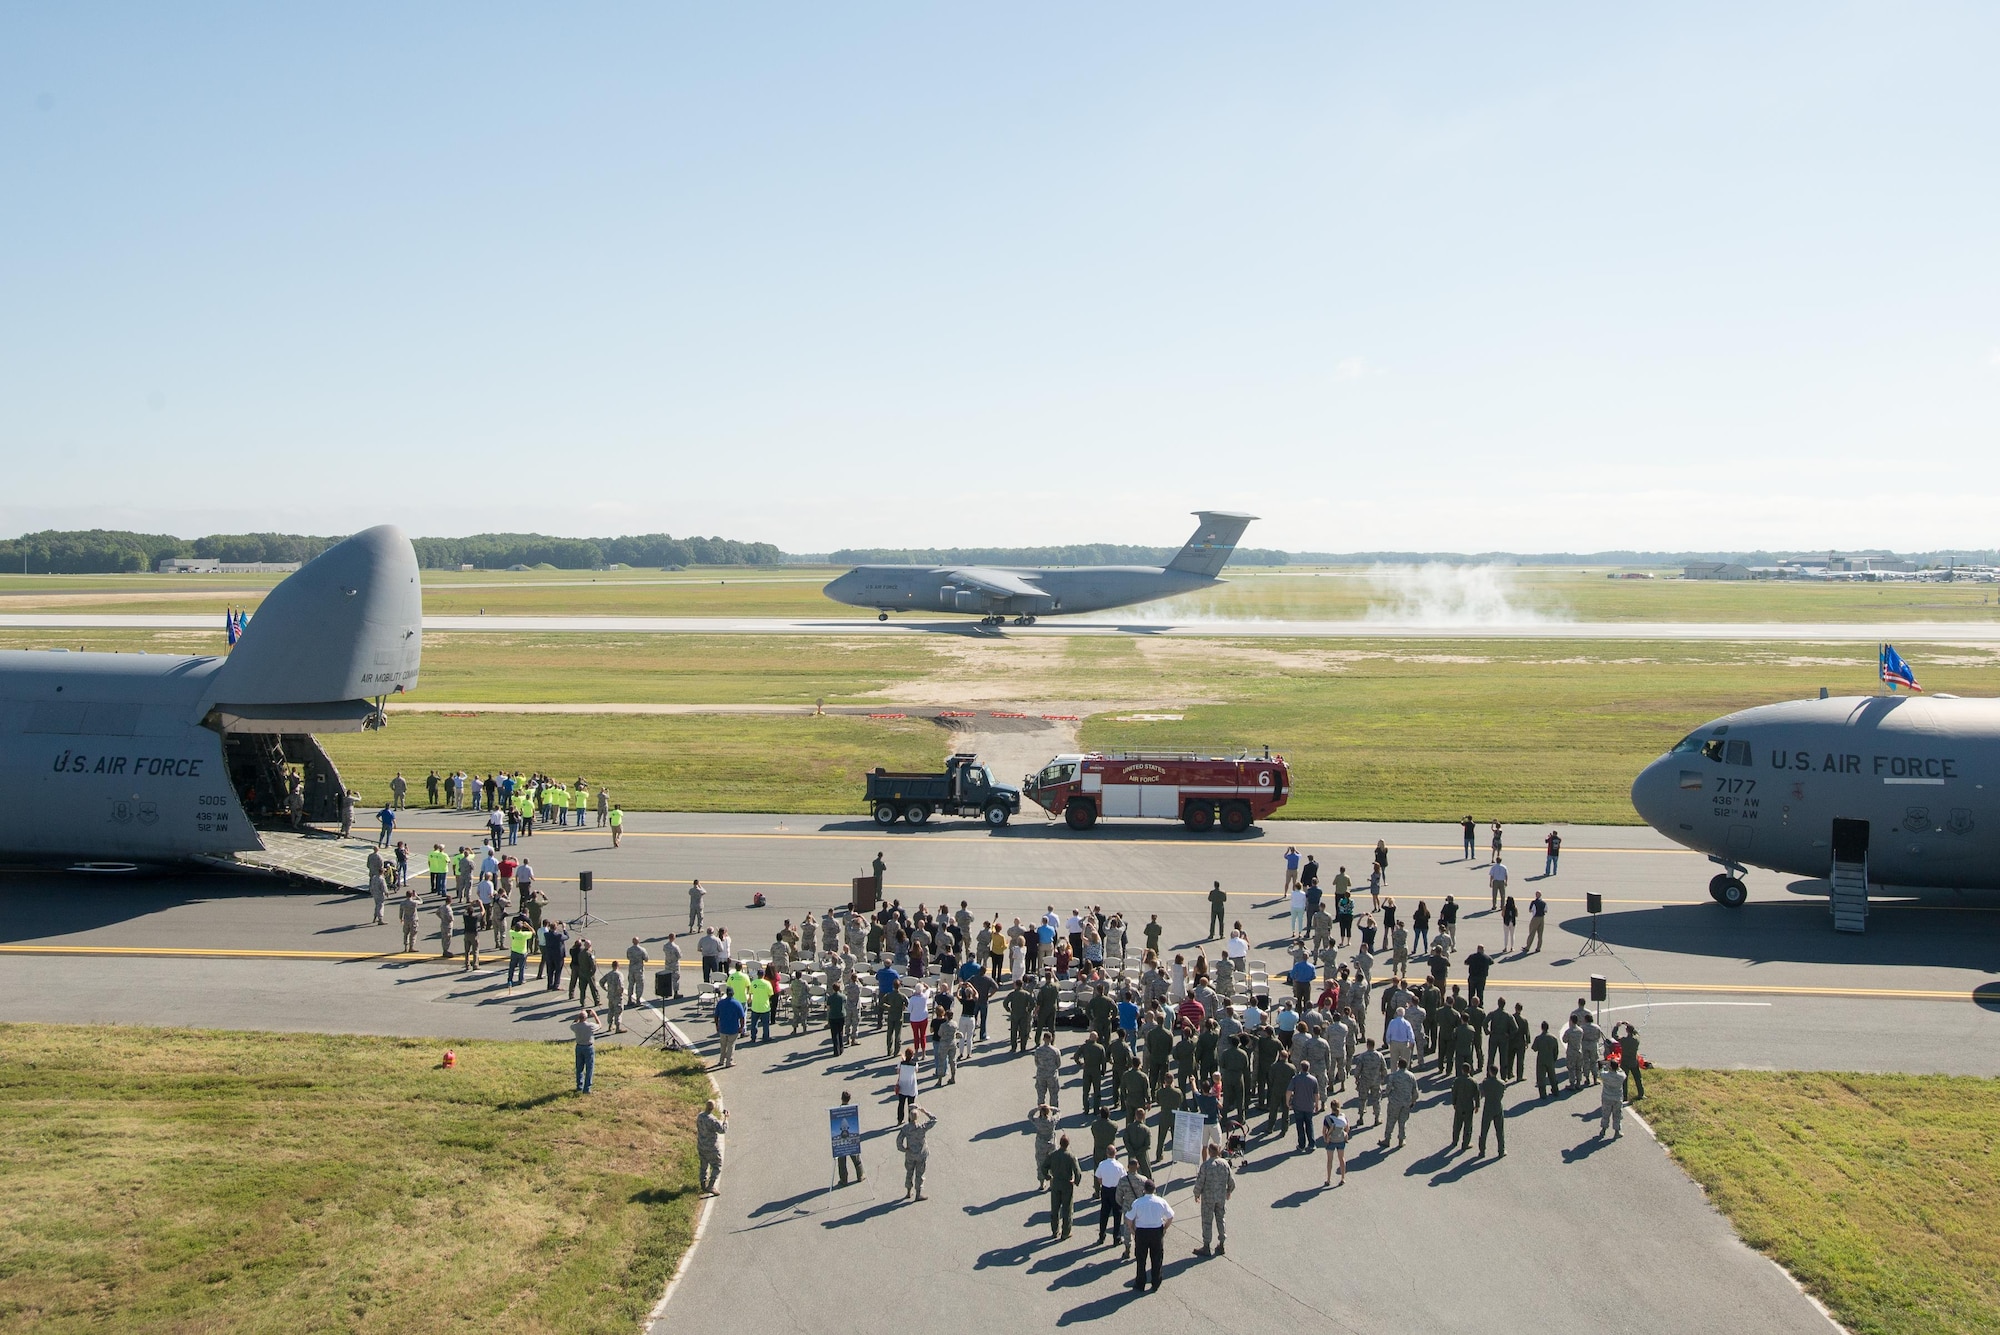 A C-5M Super Galaxy lands on Runway 01-19 during a ribbon cutting ceremony Sept. 23, 2016, on Dover Air Force Base, Del. This C-5M is the first aircraft to land on the newly reopened and reconstructed runway. (U.S. Air Force photo by Mauricio Campino) 